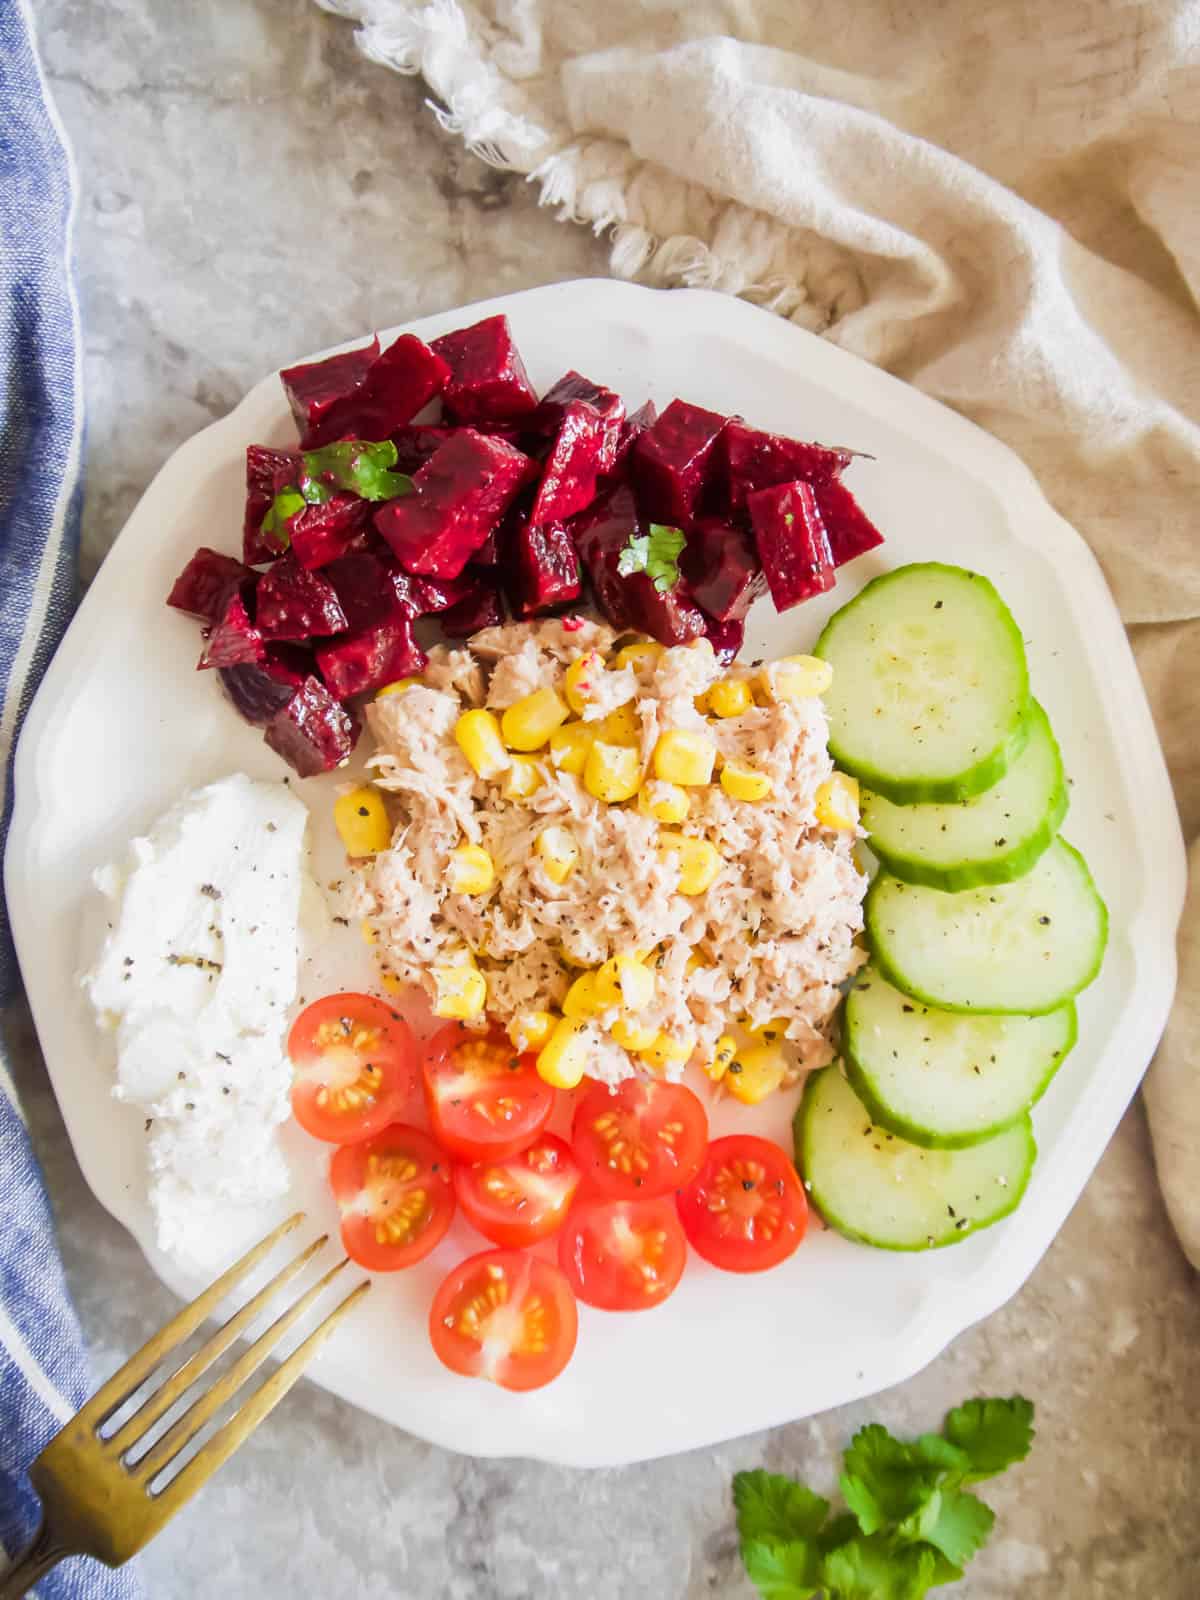 A plate full of salads, such as French beetroot salad.